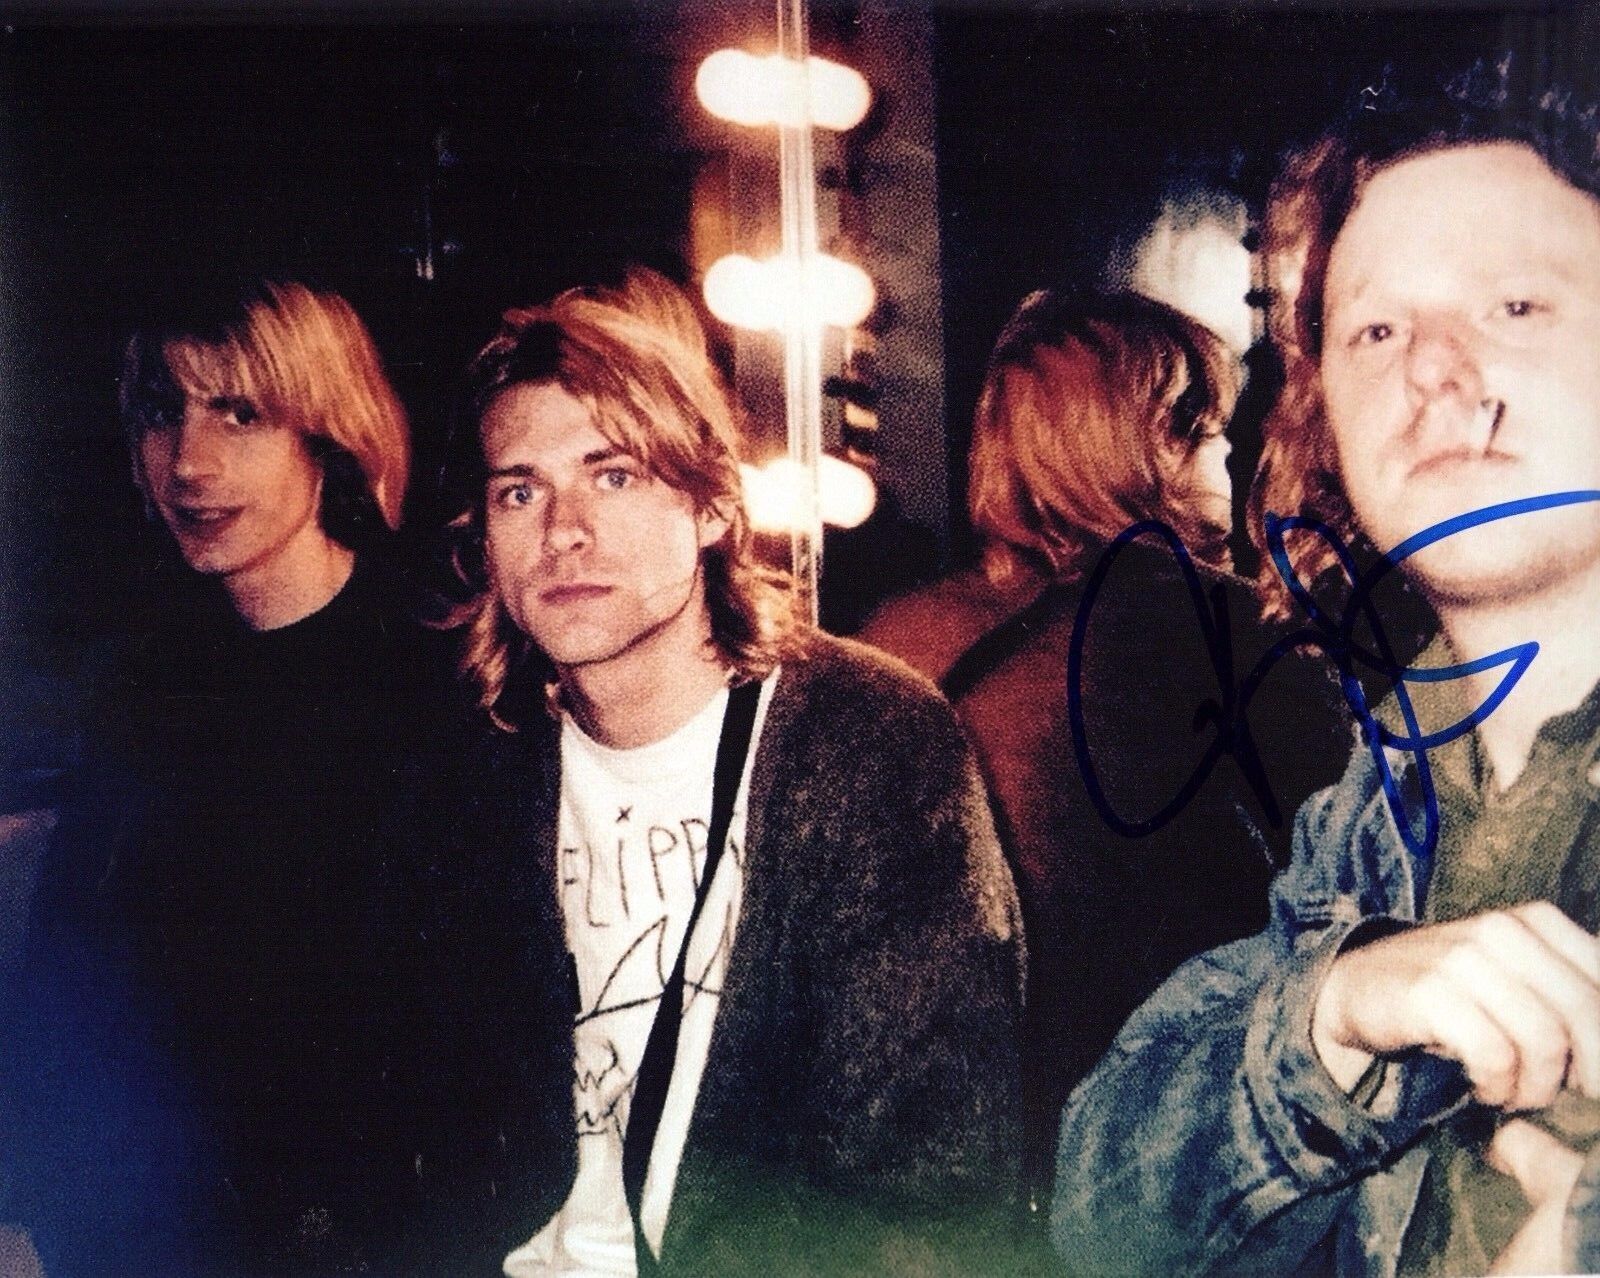 GFA Nirvana Drummer * DAN PETERS * Signed Autographed 8x10 Photo Poster painting D3 COA